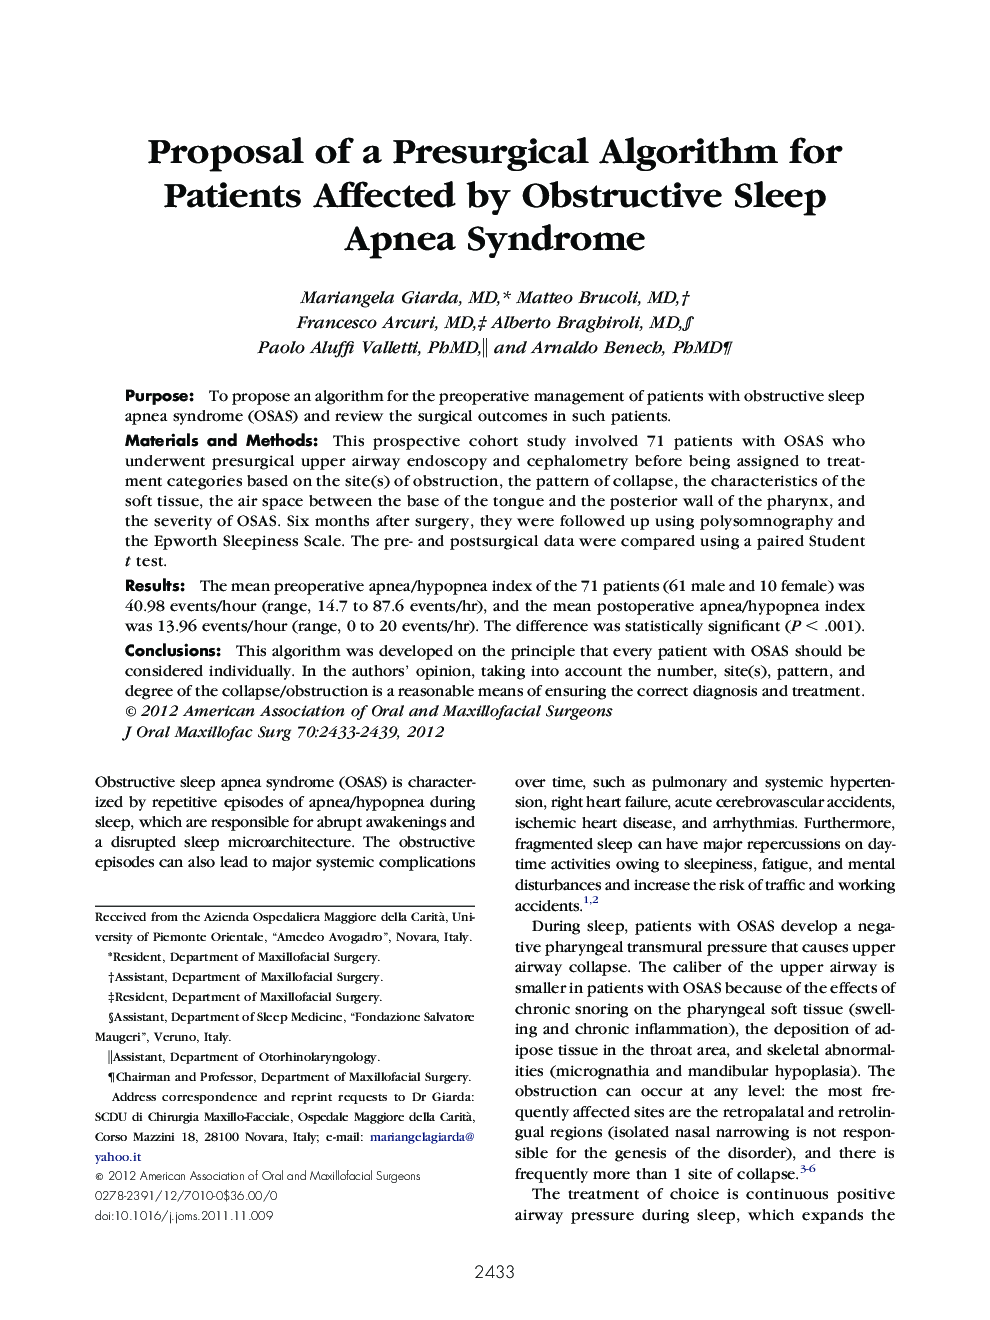 Proposal of a Presurgical Algorithm for Patients Affected by Obstructive Sleep Apnea Syndrome